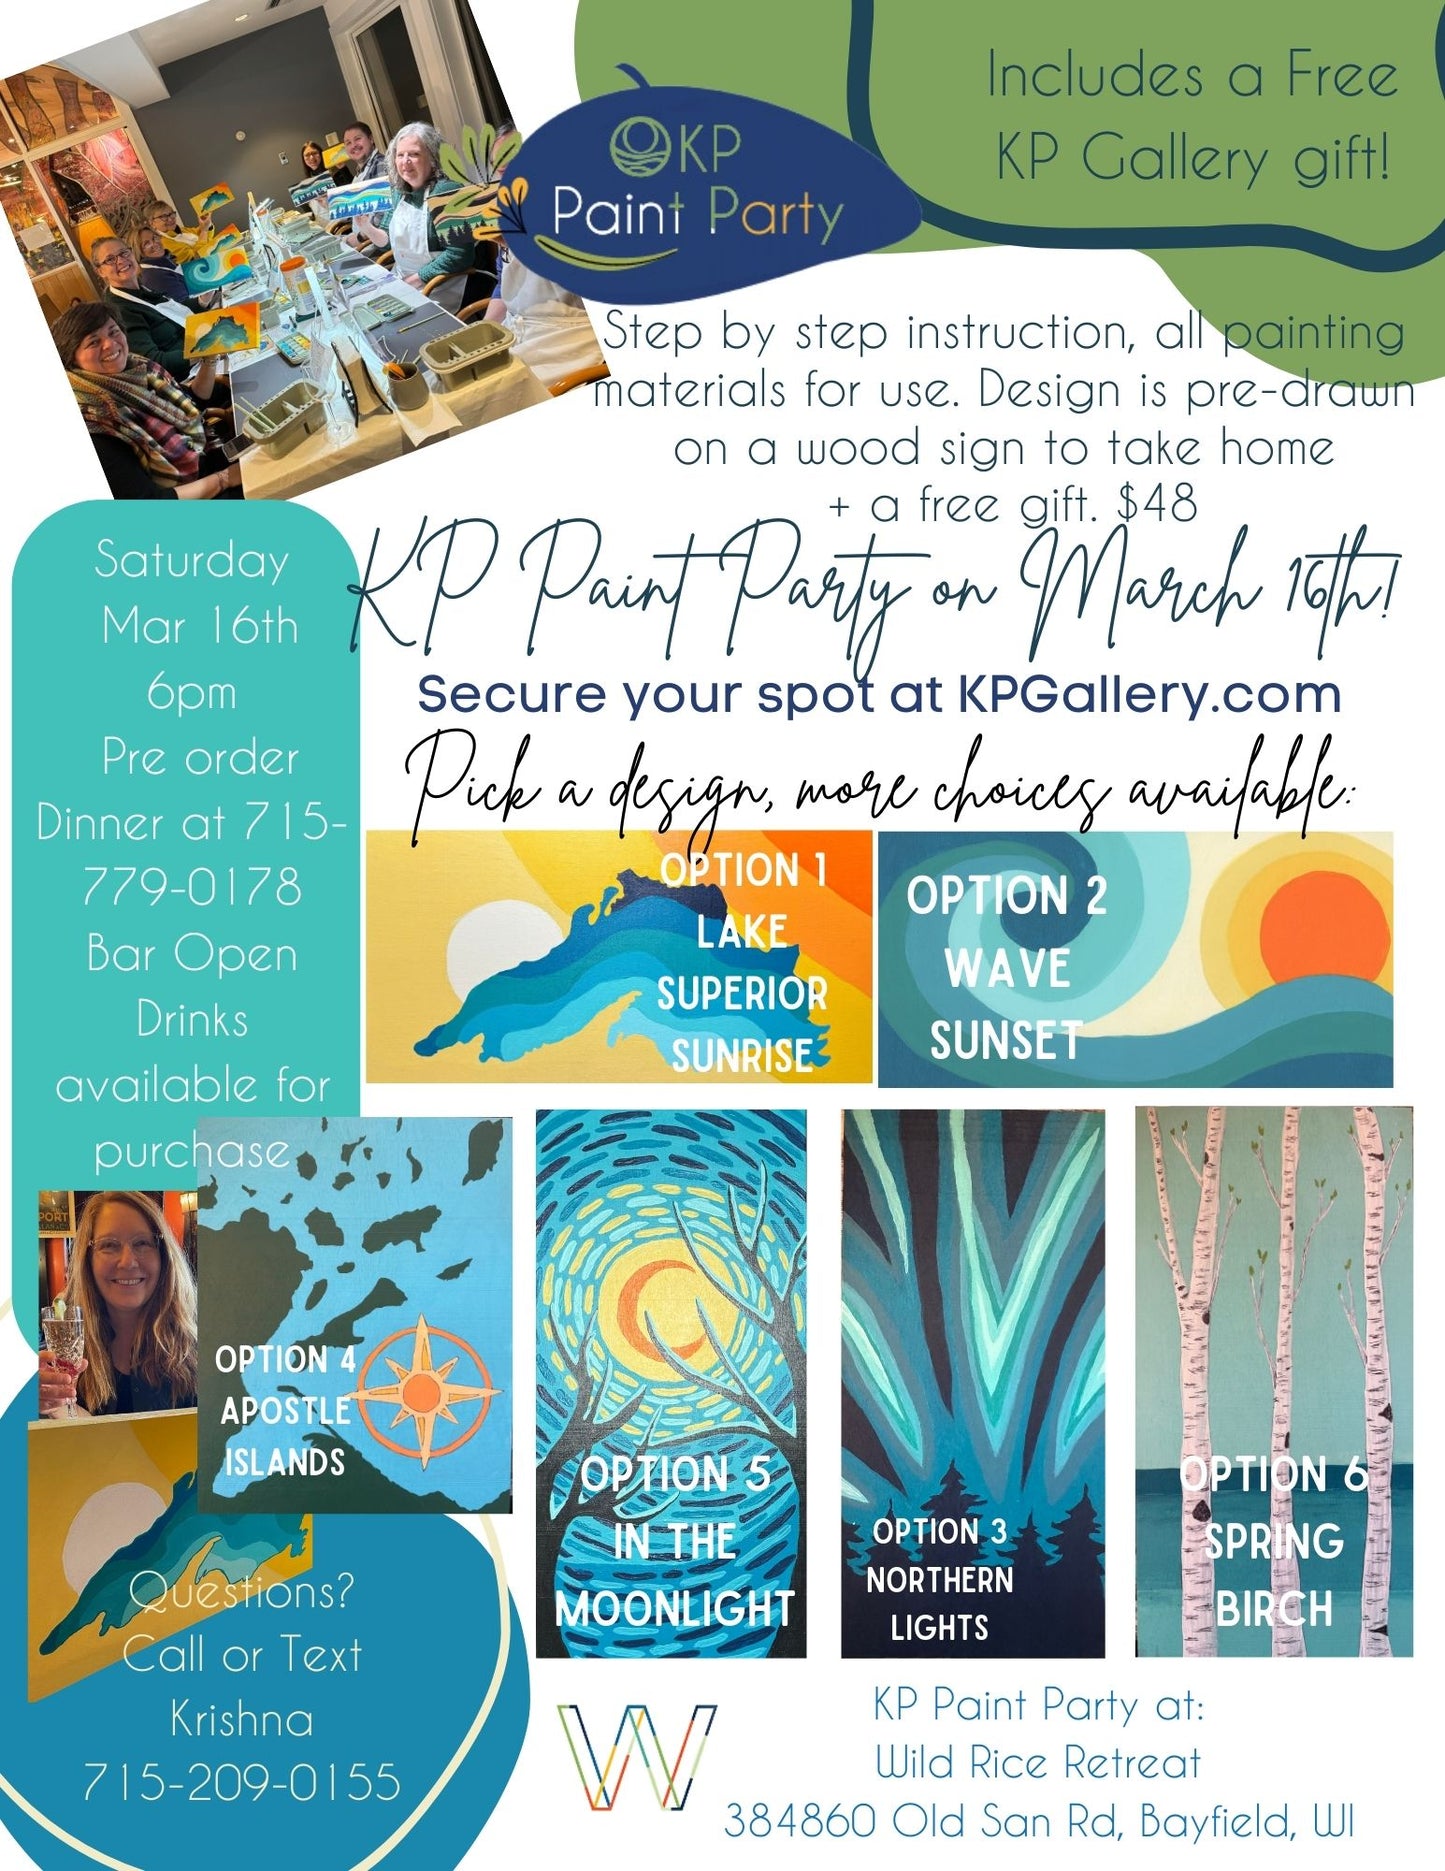 March 16th! Choose your Design KP Paint Party at Wild Rice Retreat